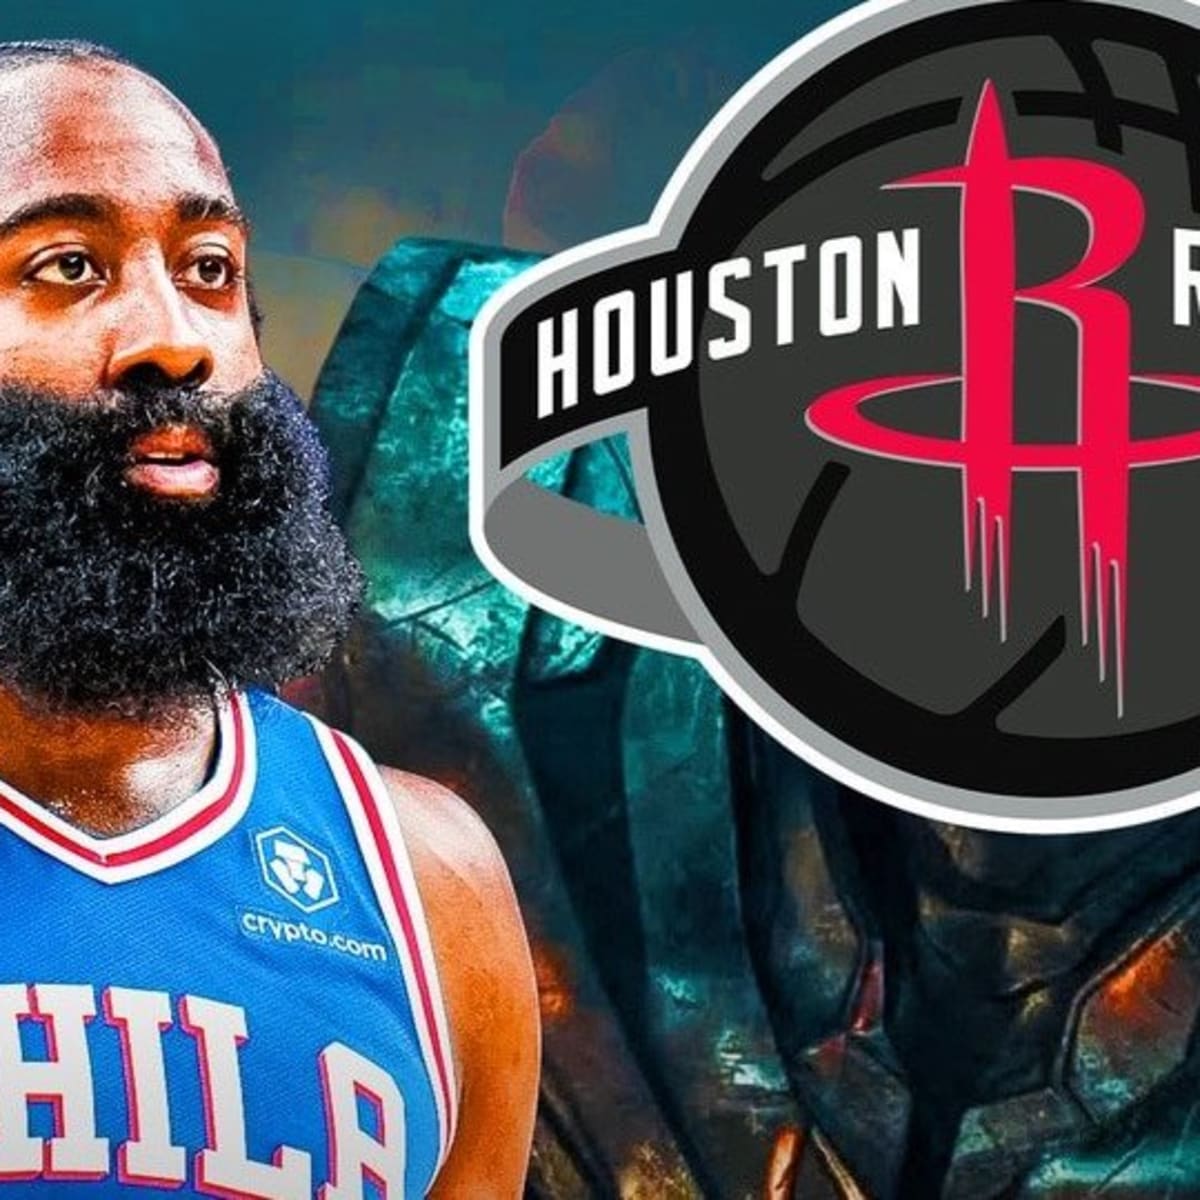 Report: Sixers' James Harden 'seriously considering' returning to Houston  Rockets in free agency